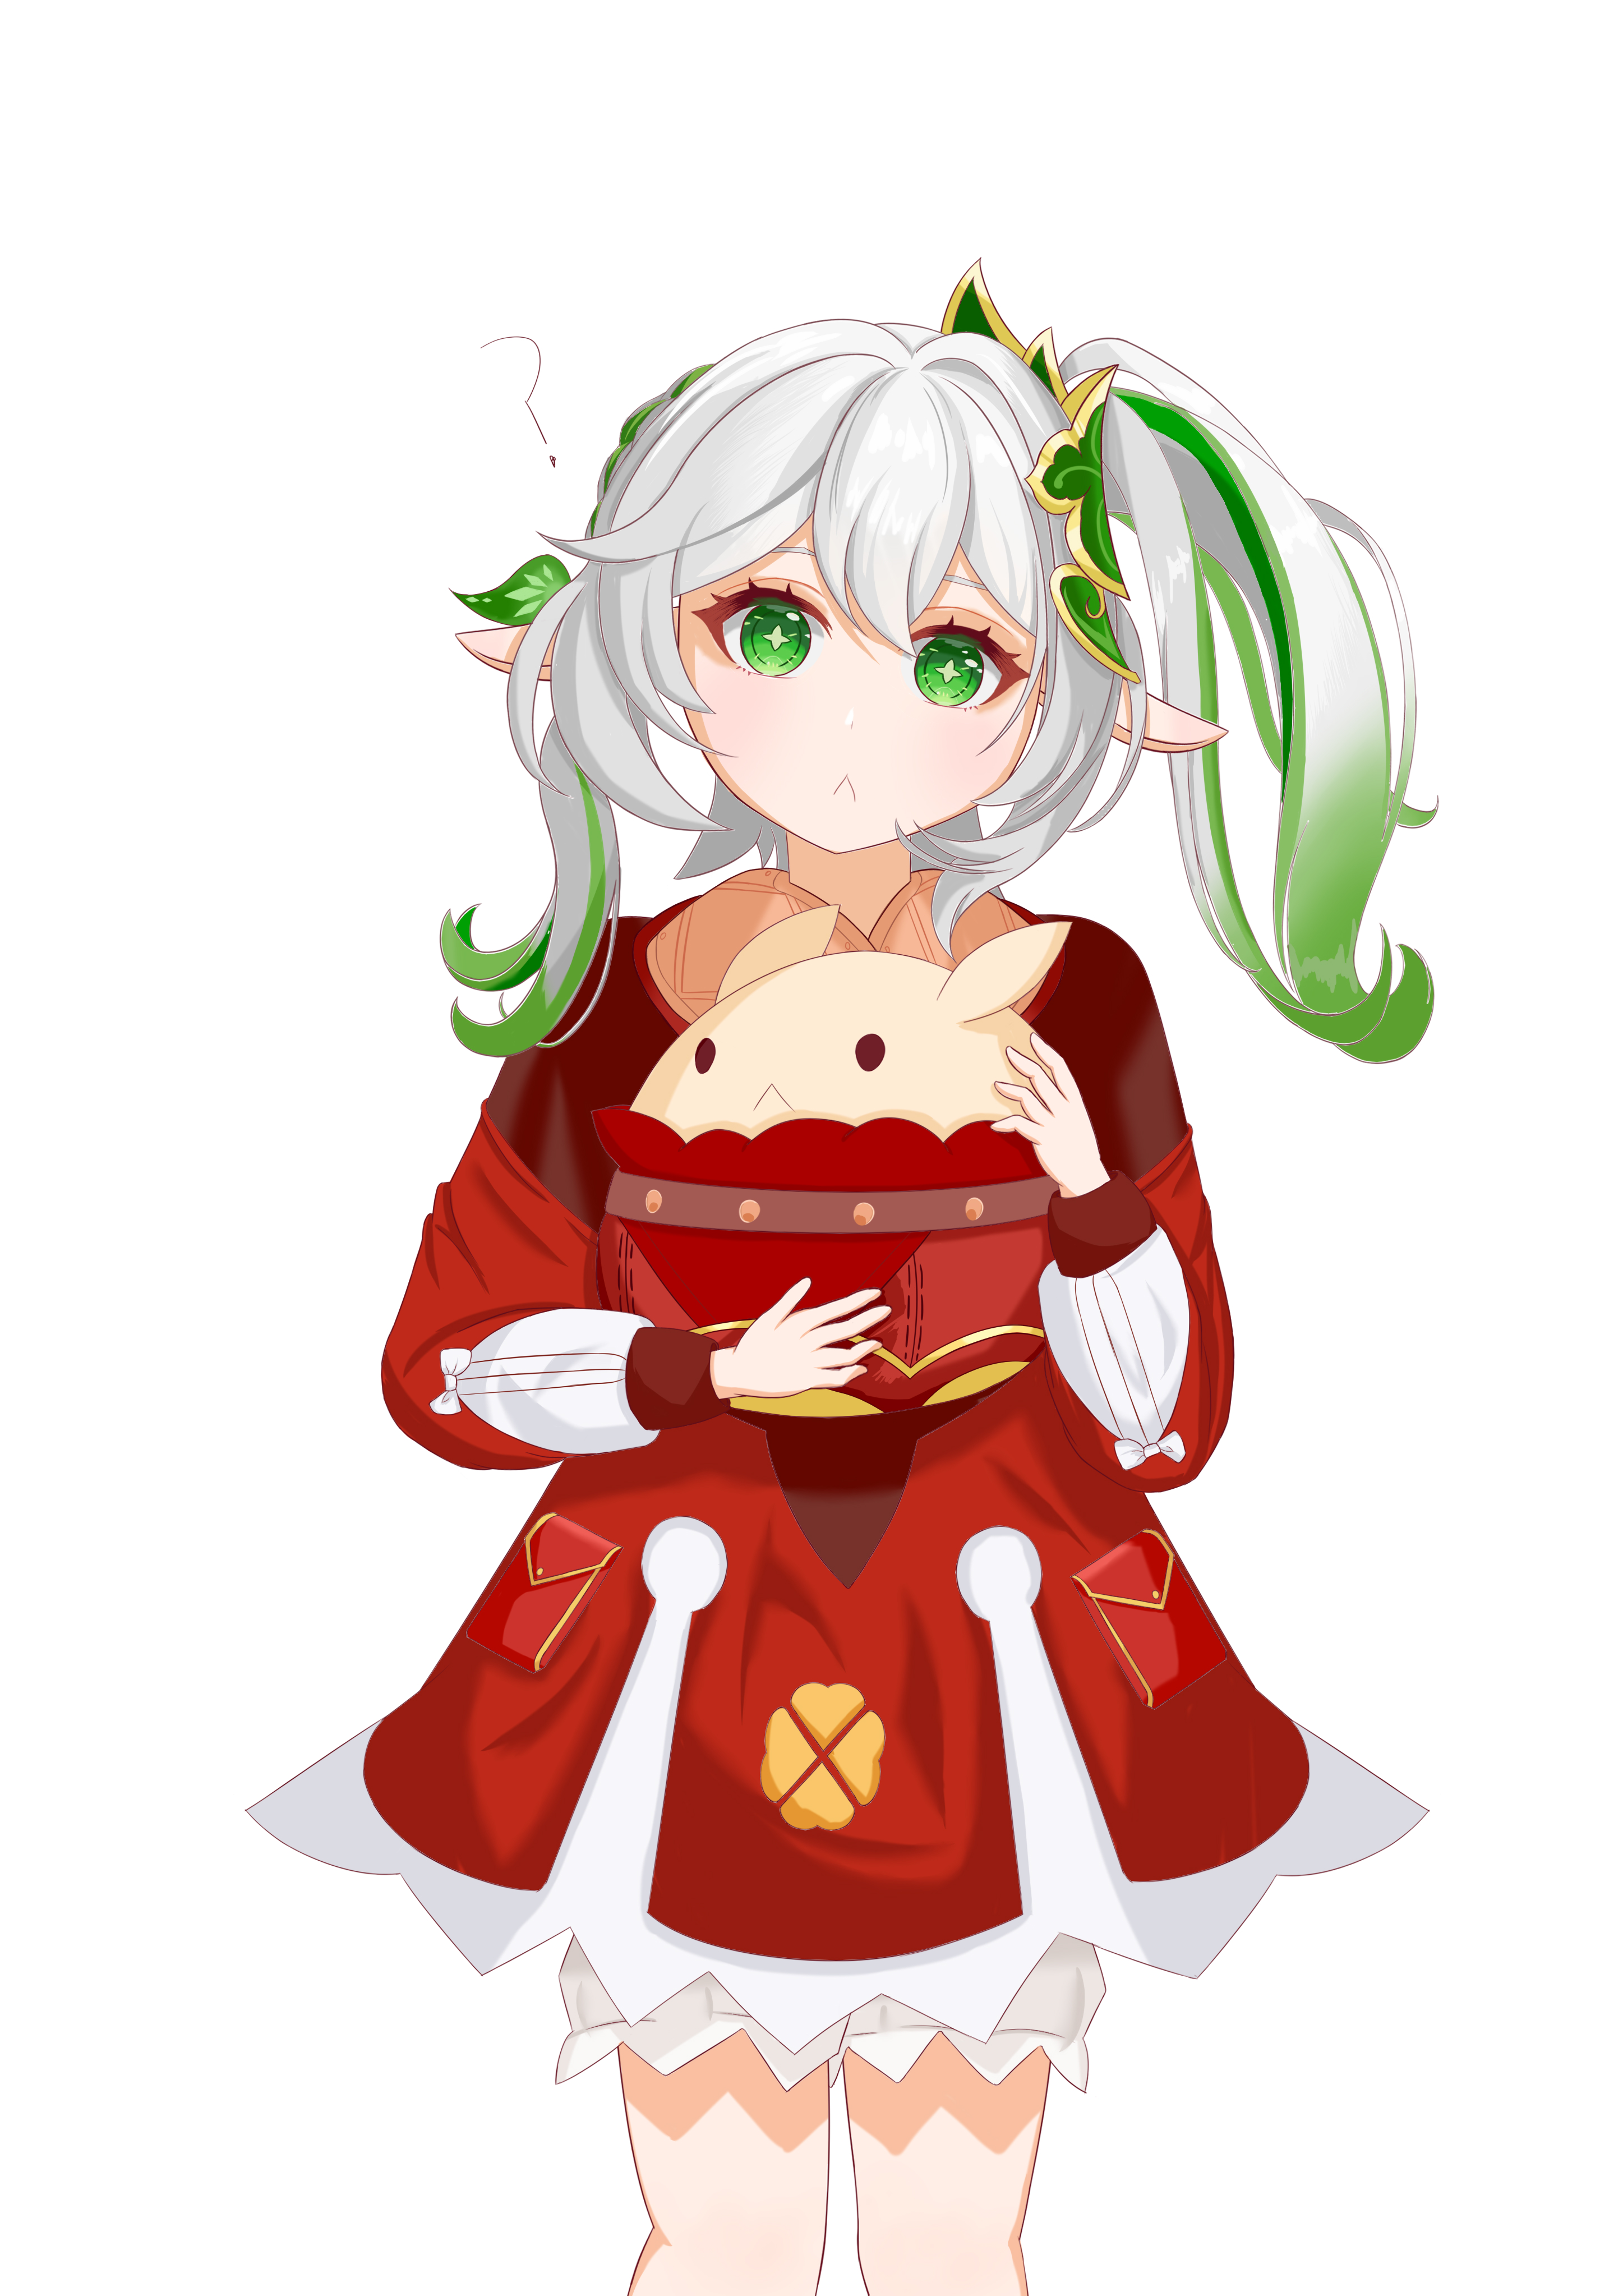 What Is Christmas Cult  Genshin Character Christmas PFP  Genshin Impact   GameWith